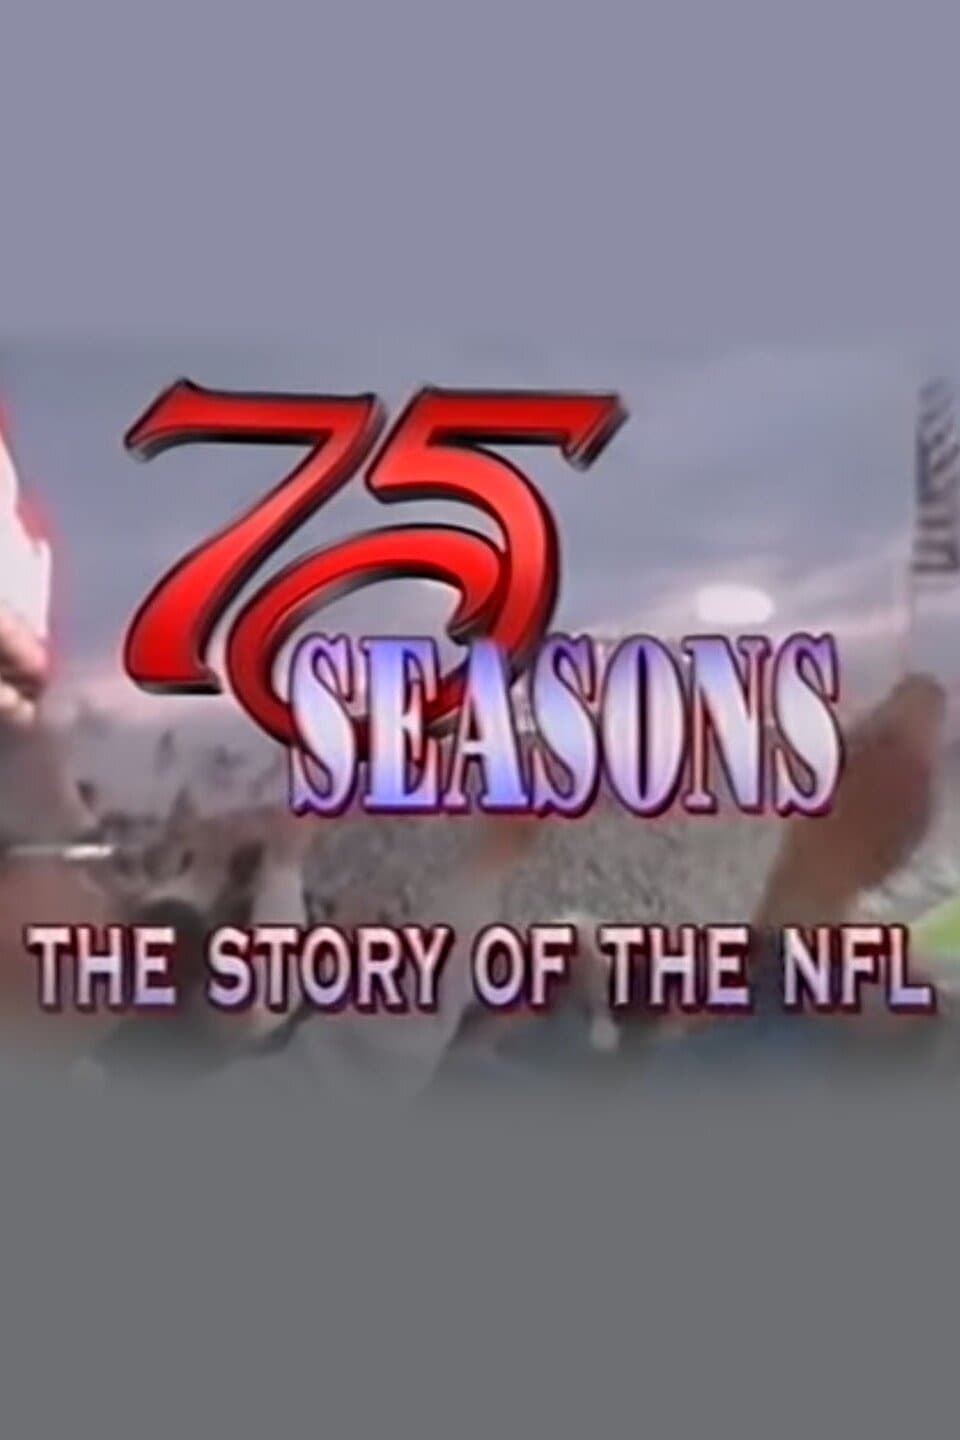 75 Seasons: The Story of the NFL